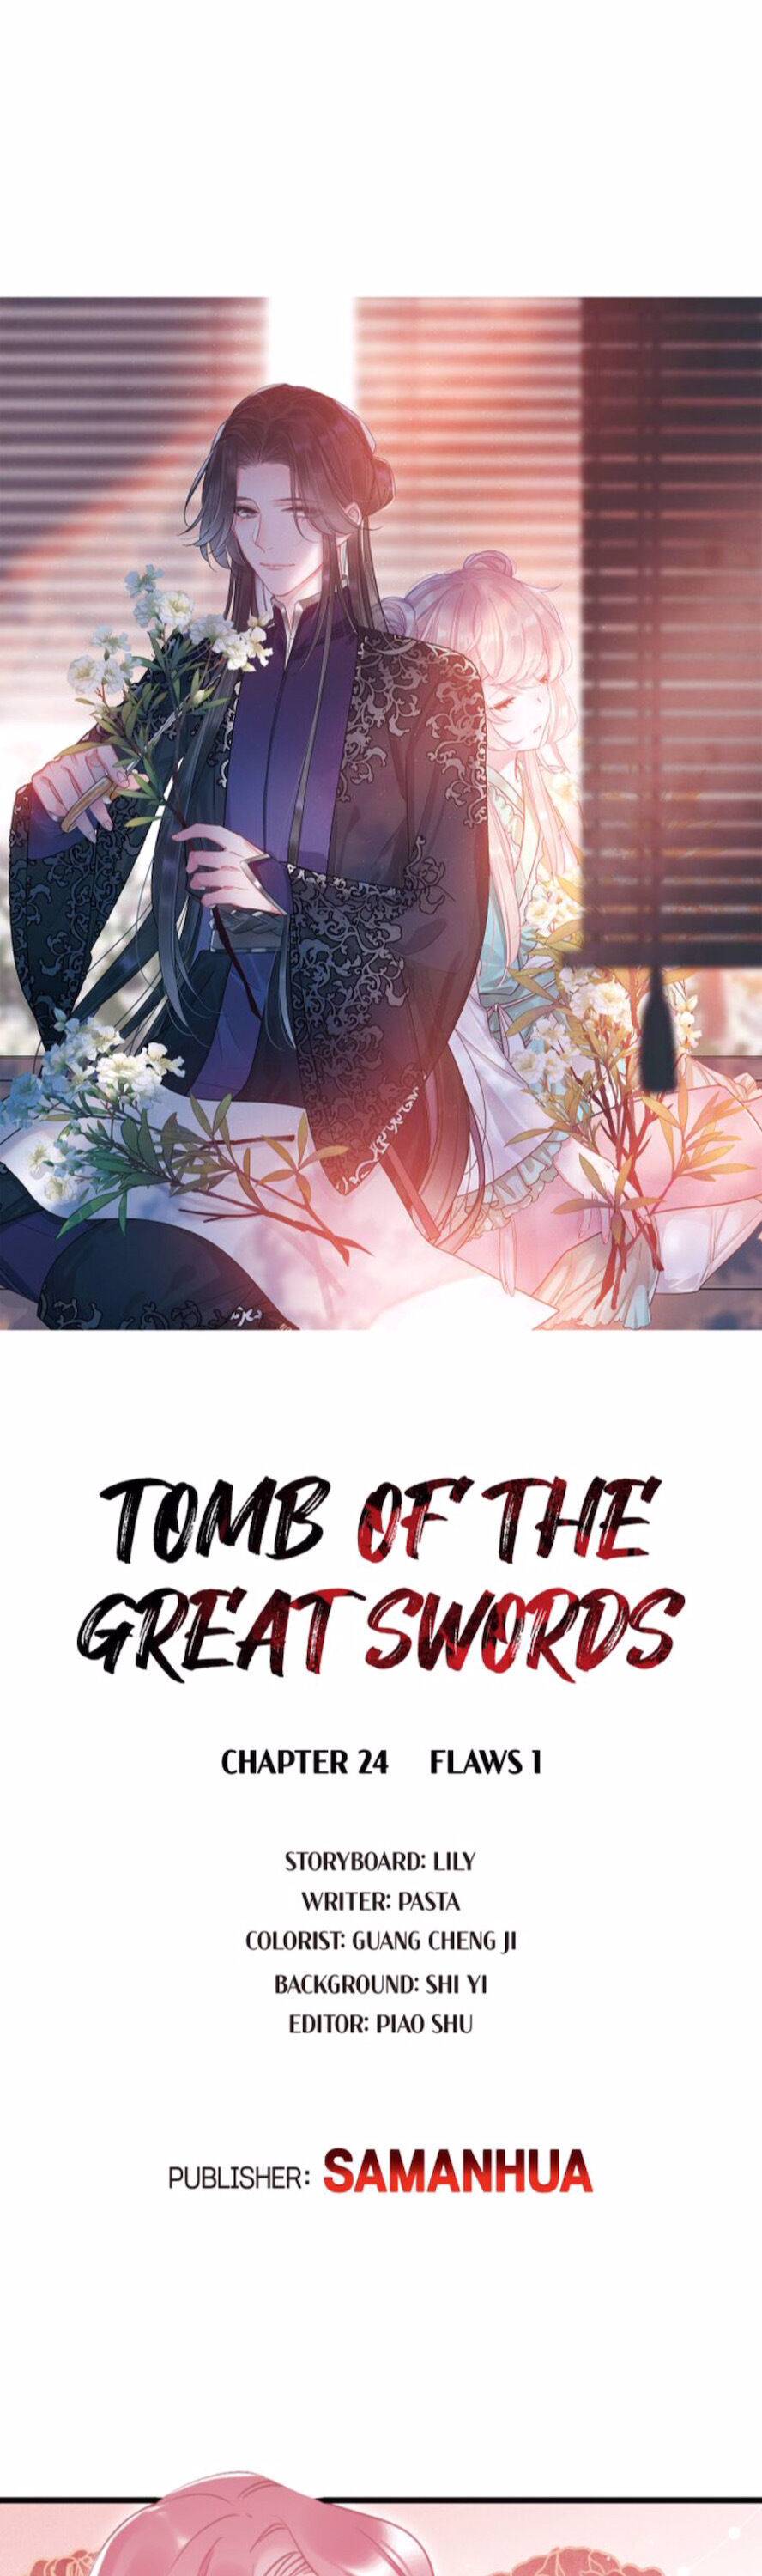 The Tomb of Famed Swords chapter 24